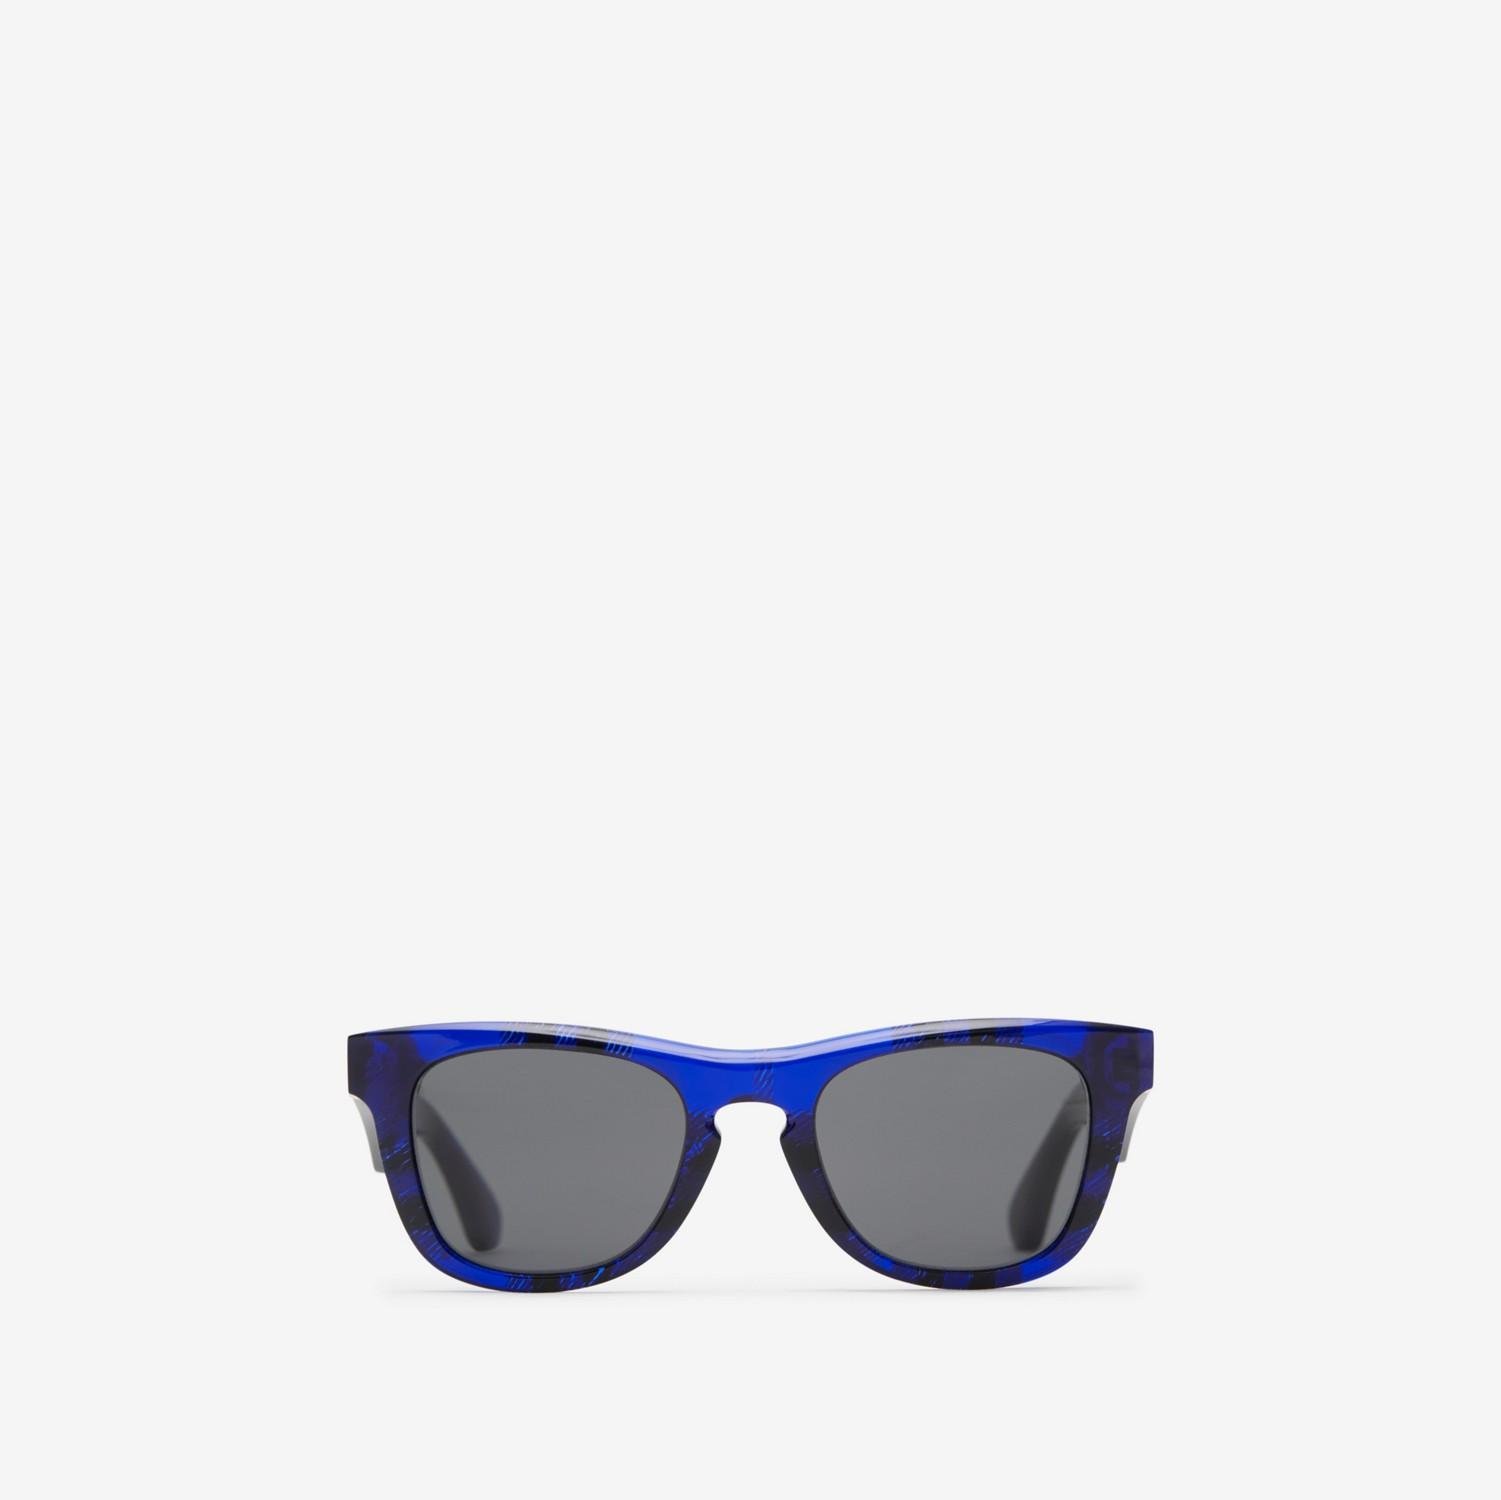 Arch Sunglasses by BURBERRY